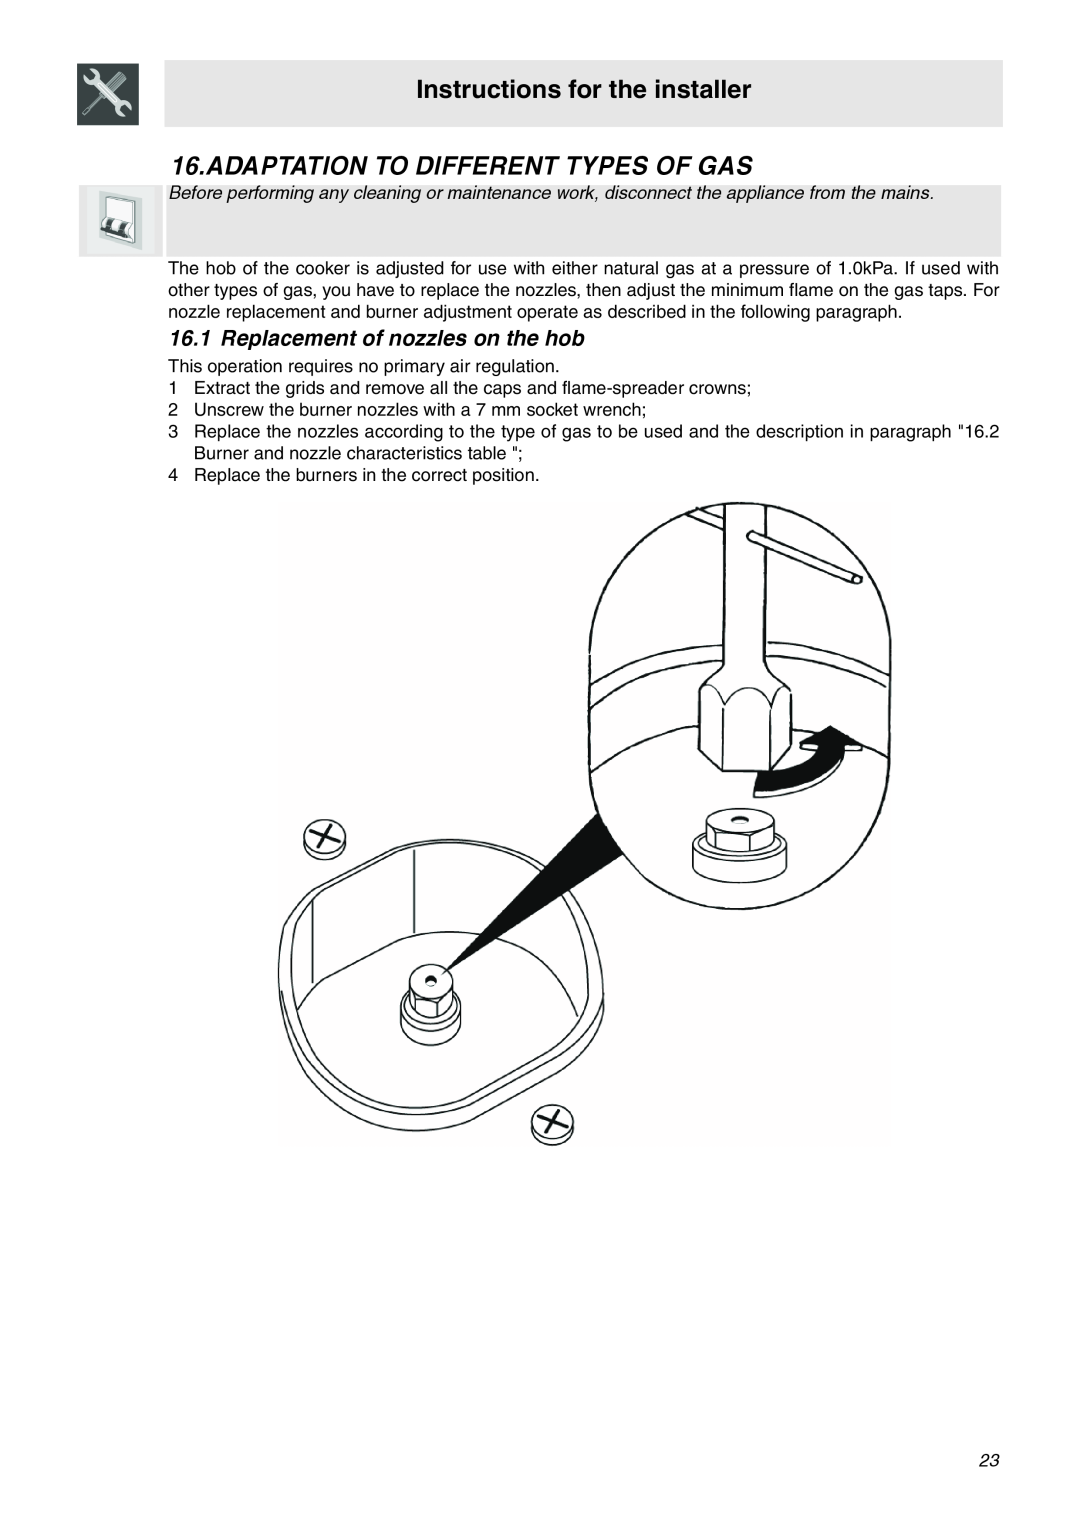 Smeg SNZ91MFA Adaptation To Different Types Of Gas, Replacement of nozzles on the hob, Instructions for the installer 